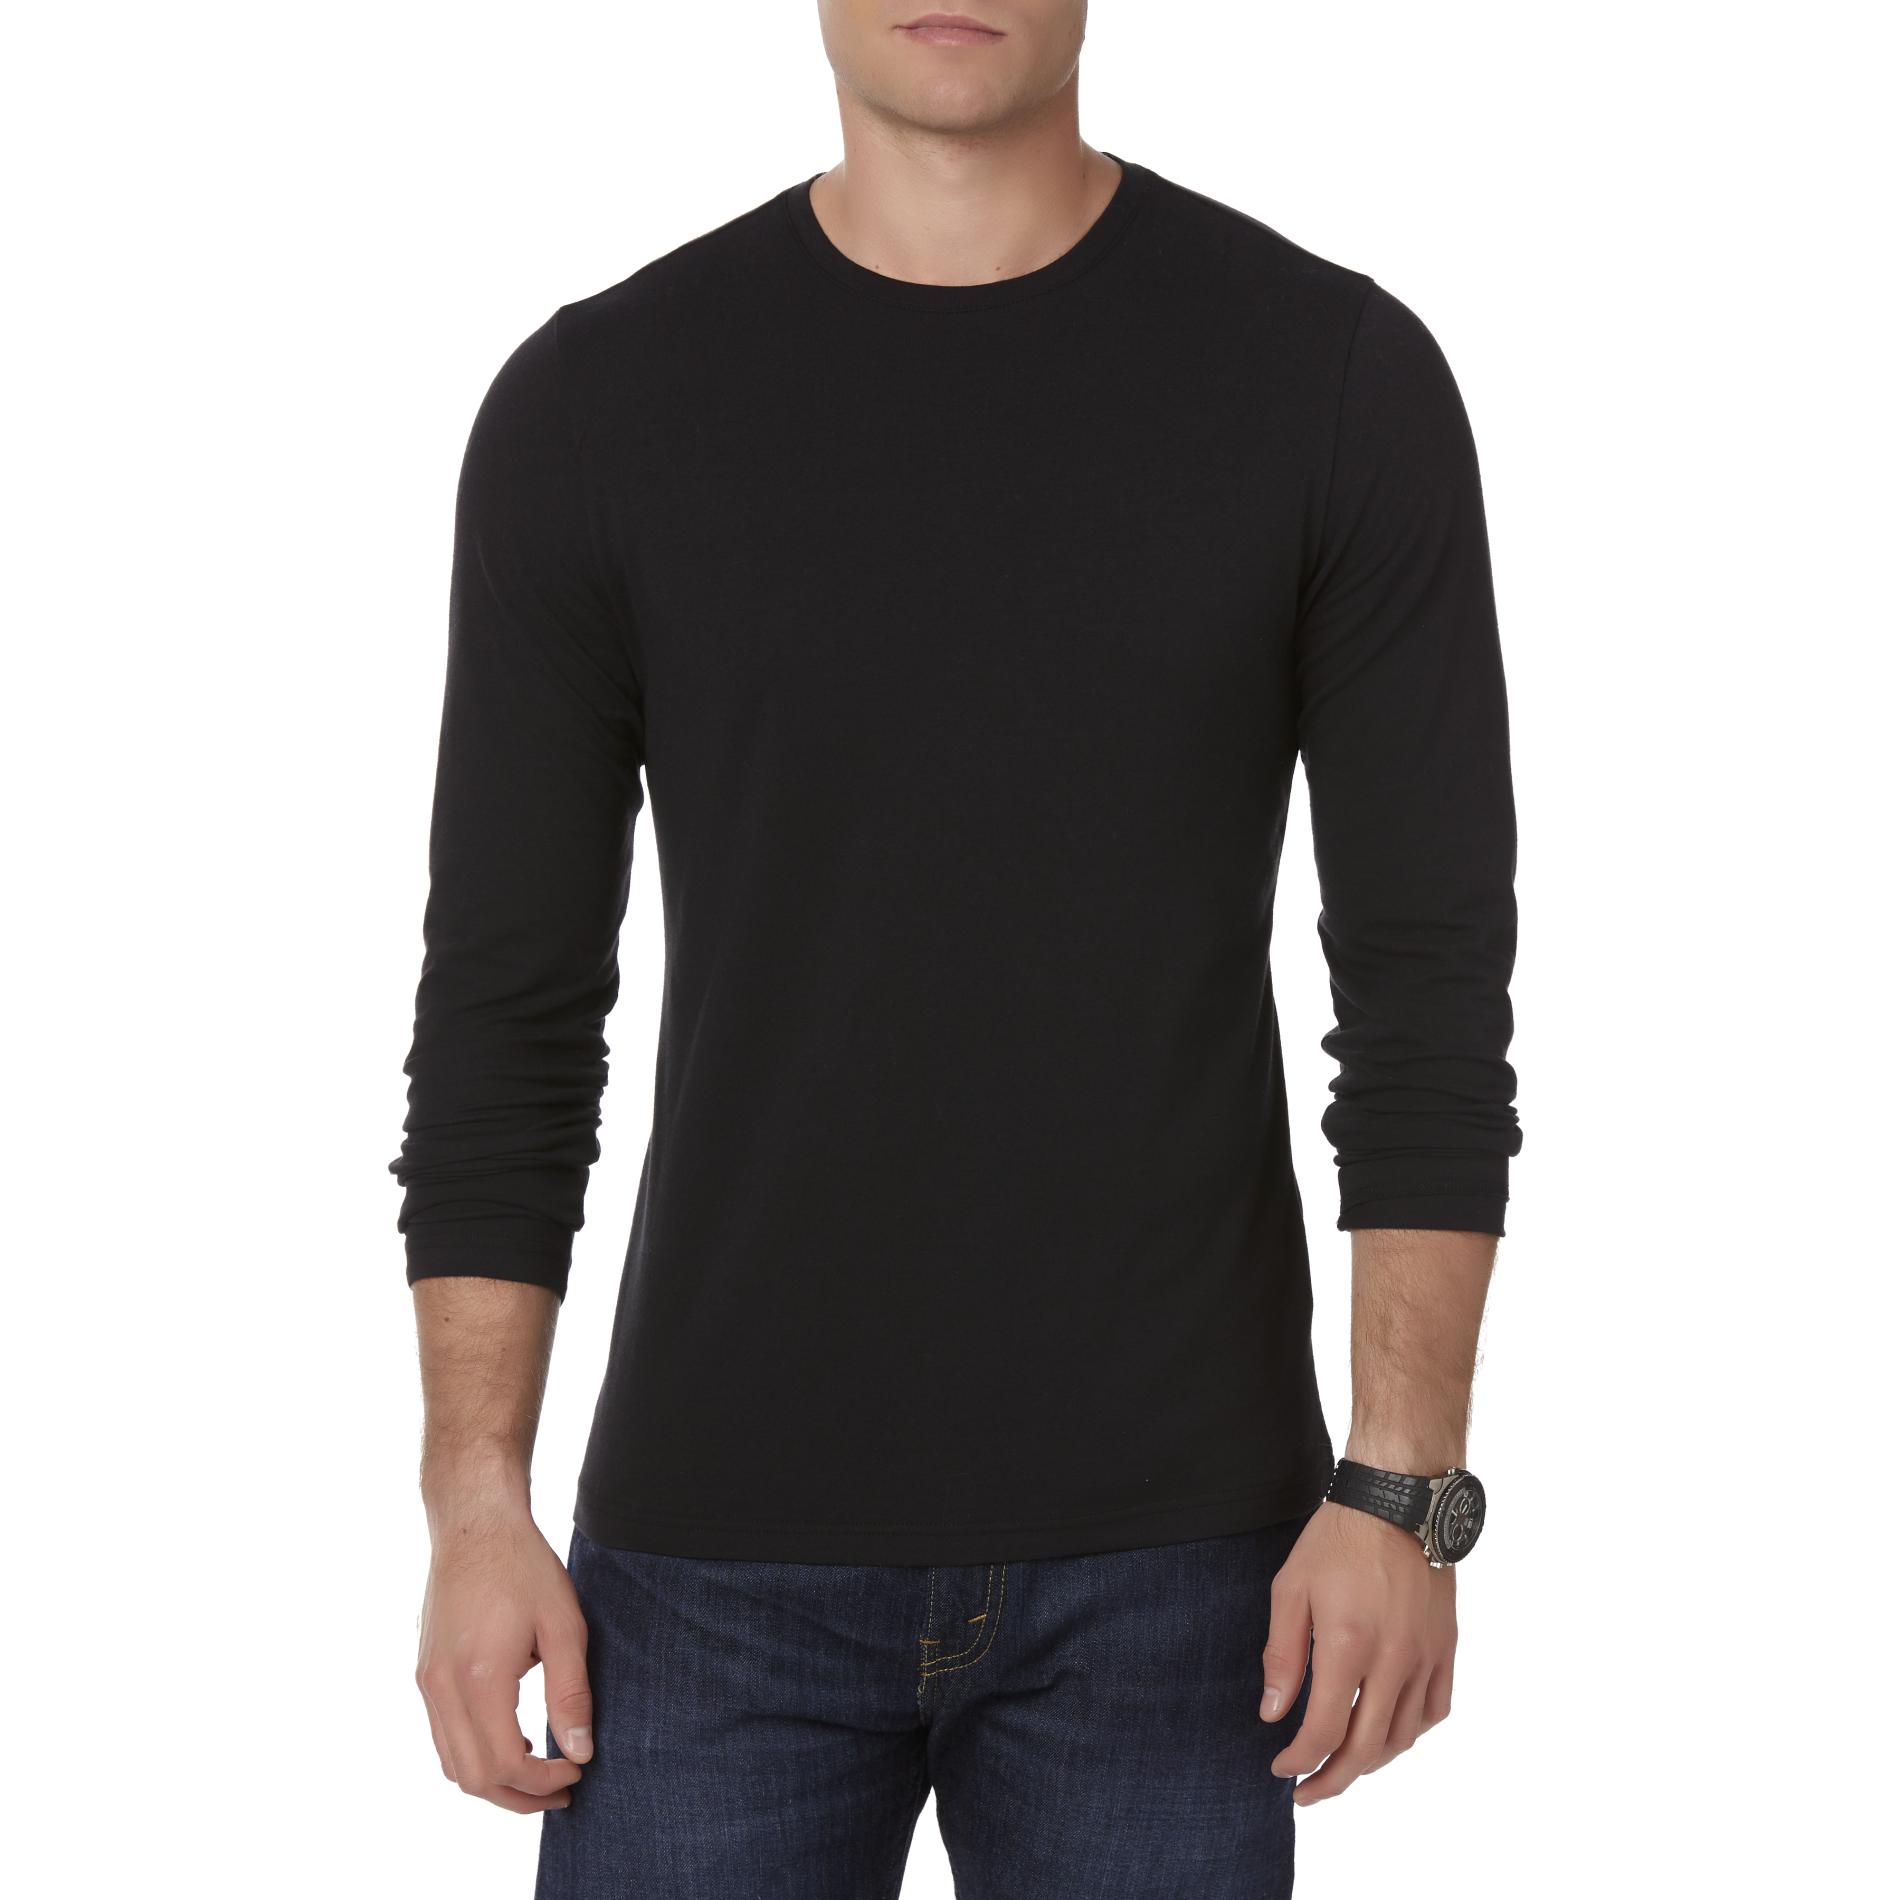 Structure Young Men's Long-Sleeve T-Shirt